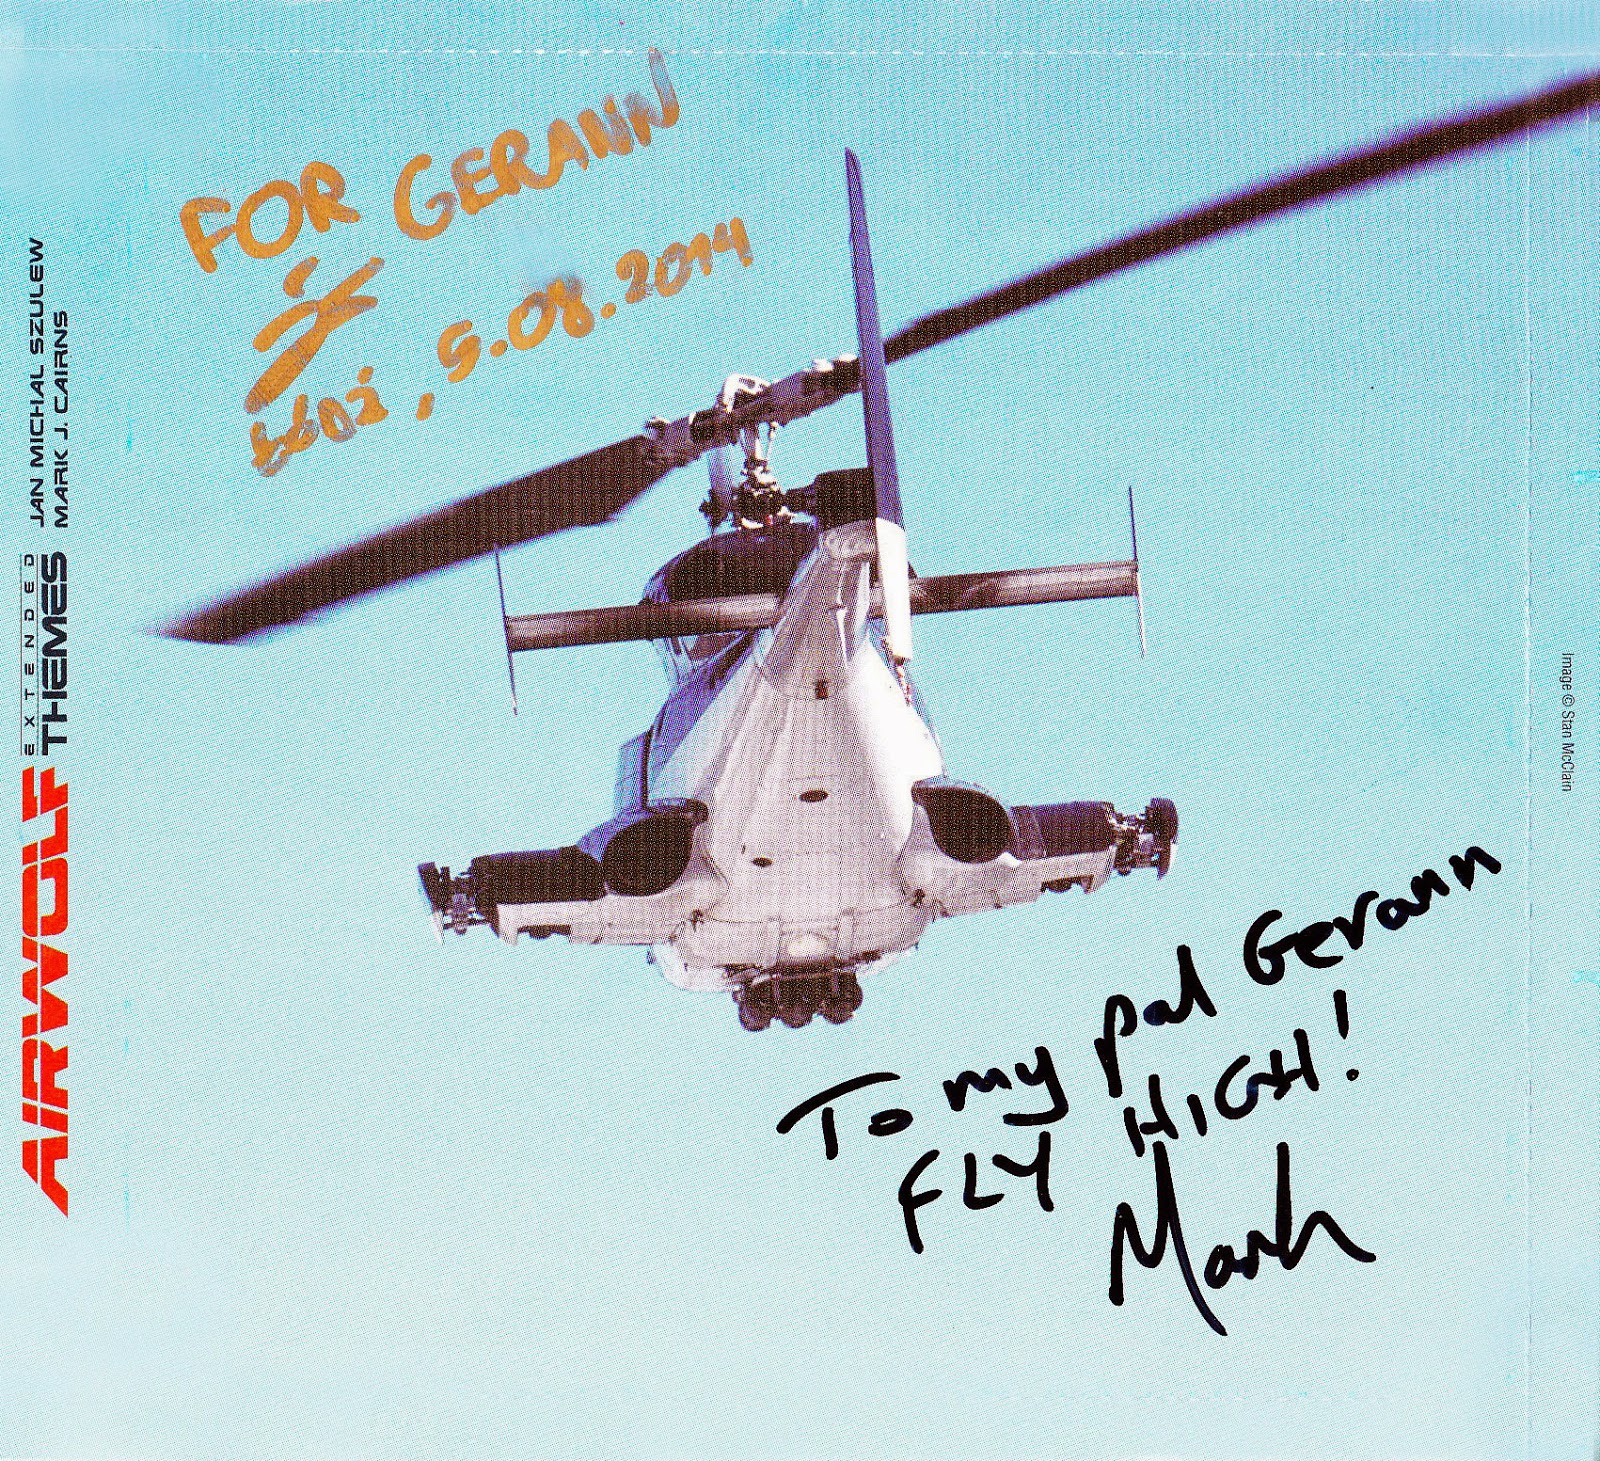 The signed Airwolf Extended Themes' artwork with both musicians' signatures